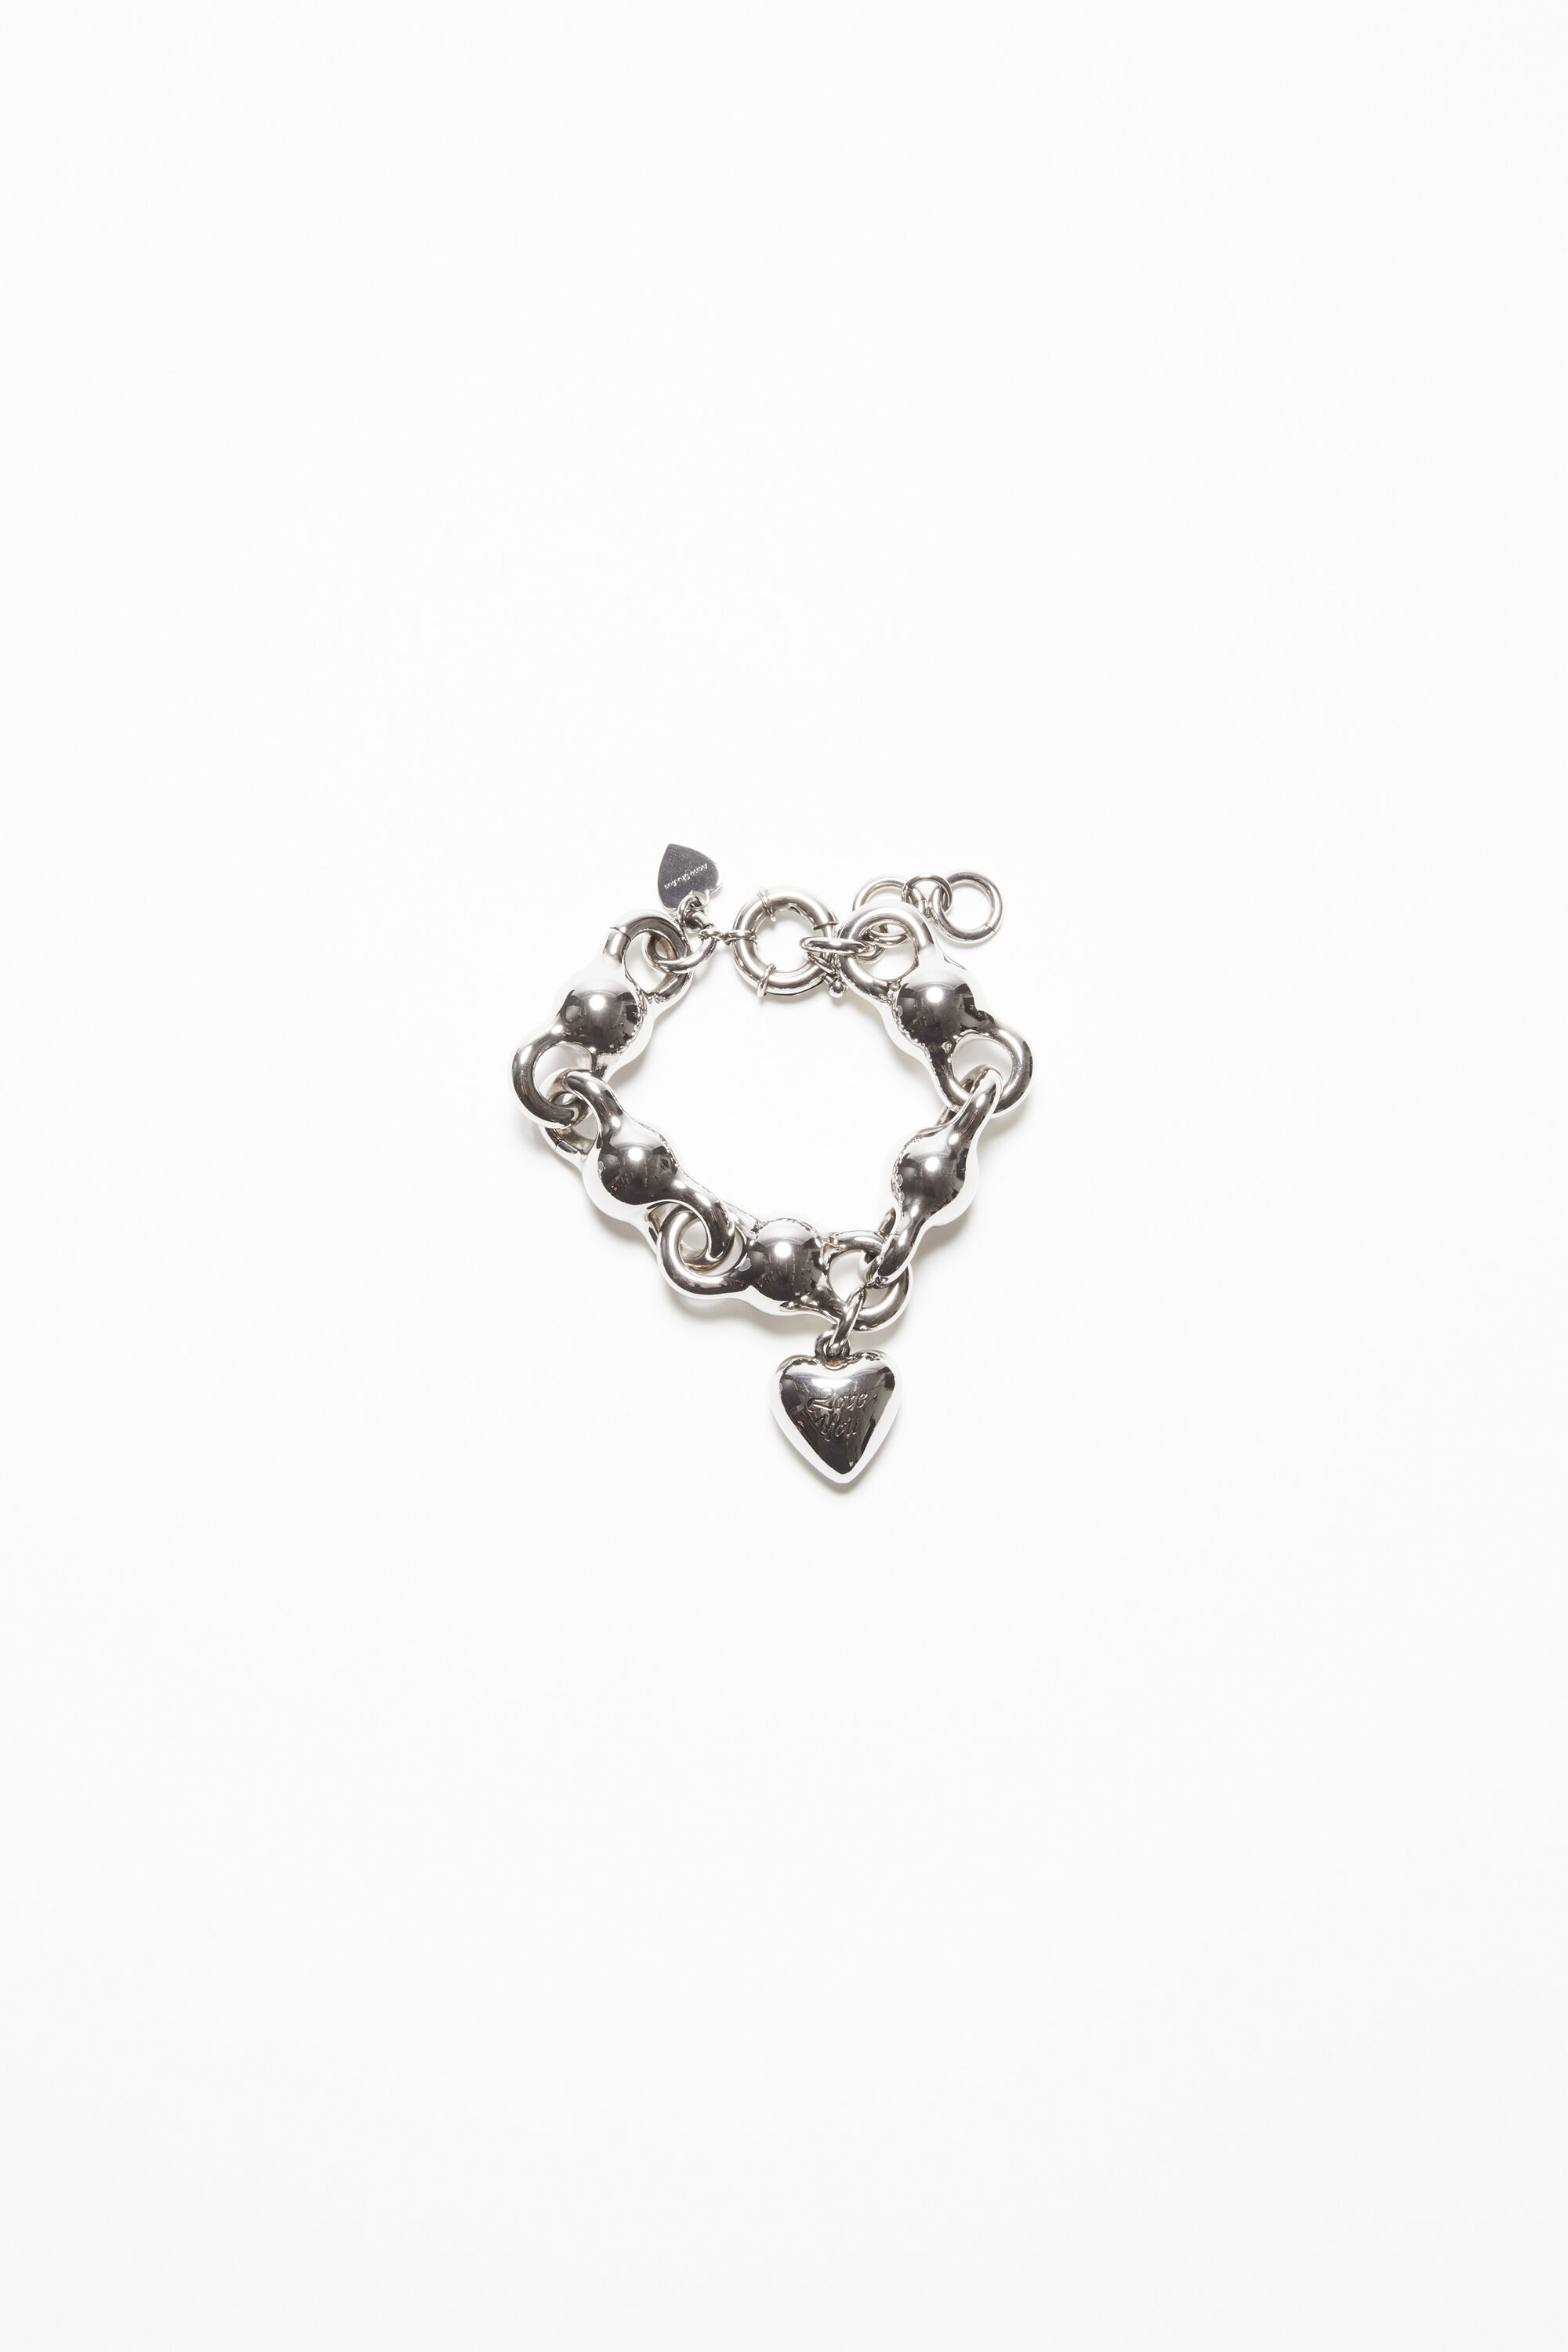 Loving Words Silver Heart Charm for Lizzy James Charm Bracelets